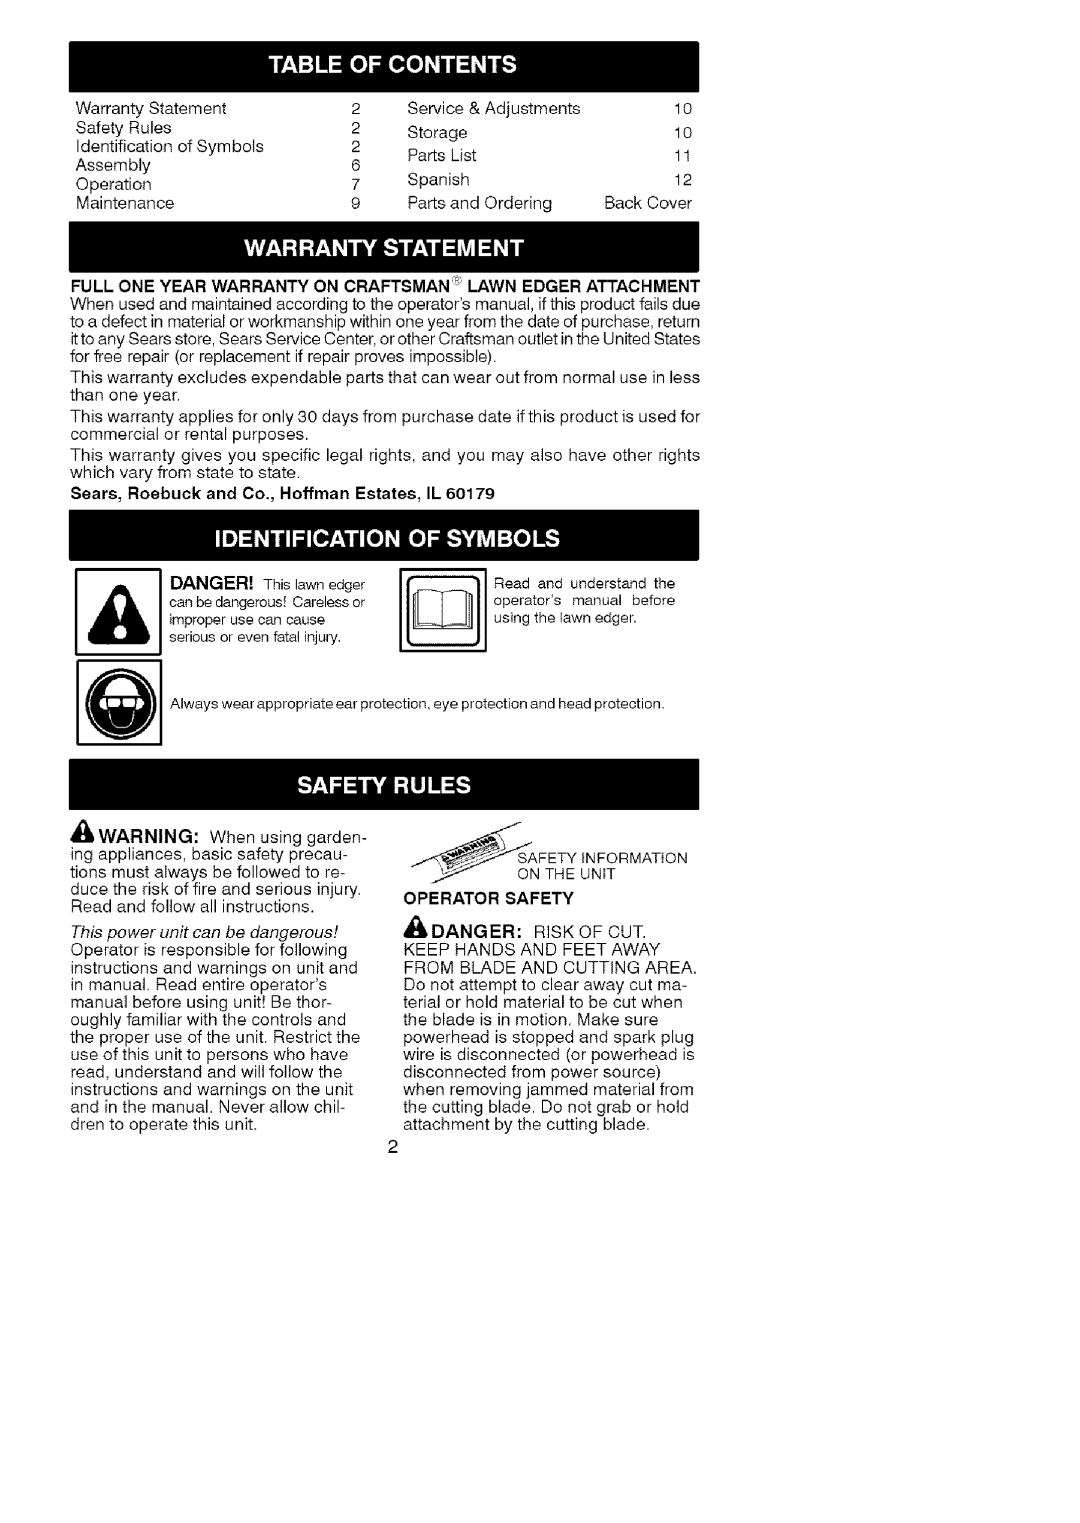 Craftsman 358.792403 manual Sears, Roebuck and Co., Hoffman Estates, IL, Operator Safety 